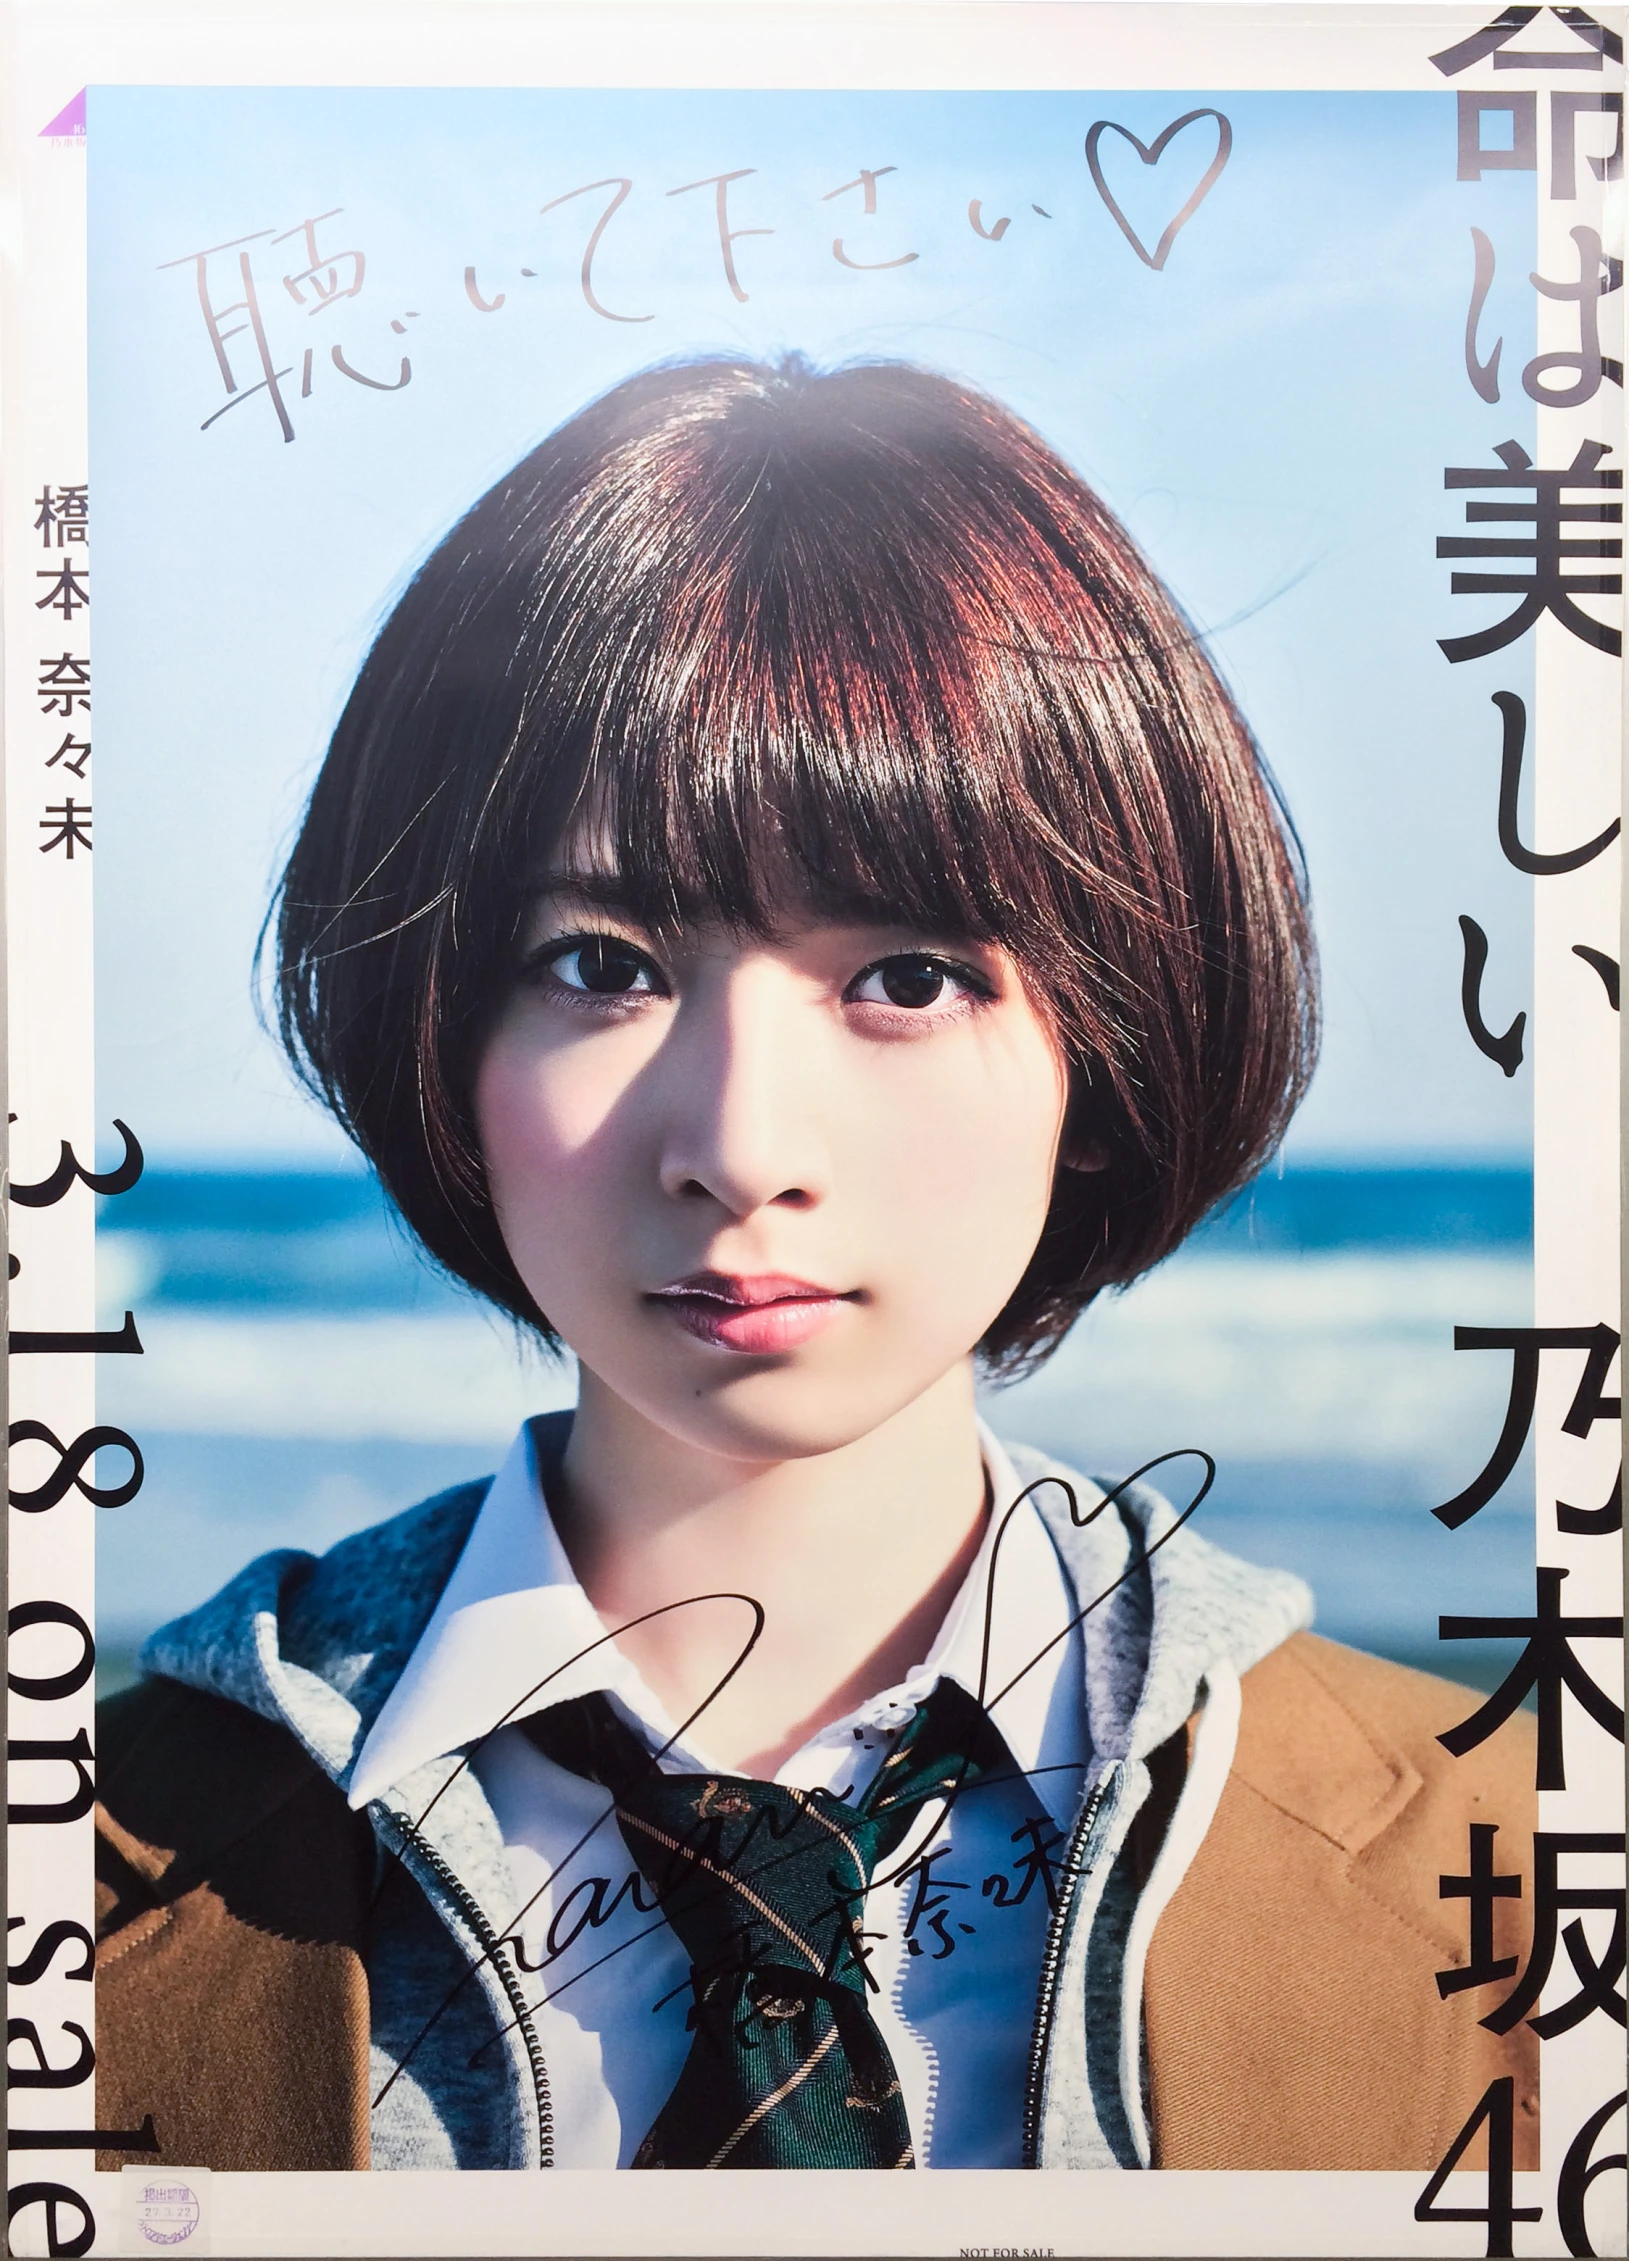 a japanese magazine with a young woman wearing a tie